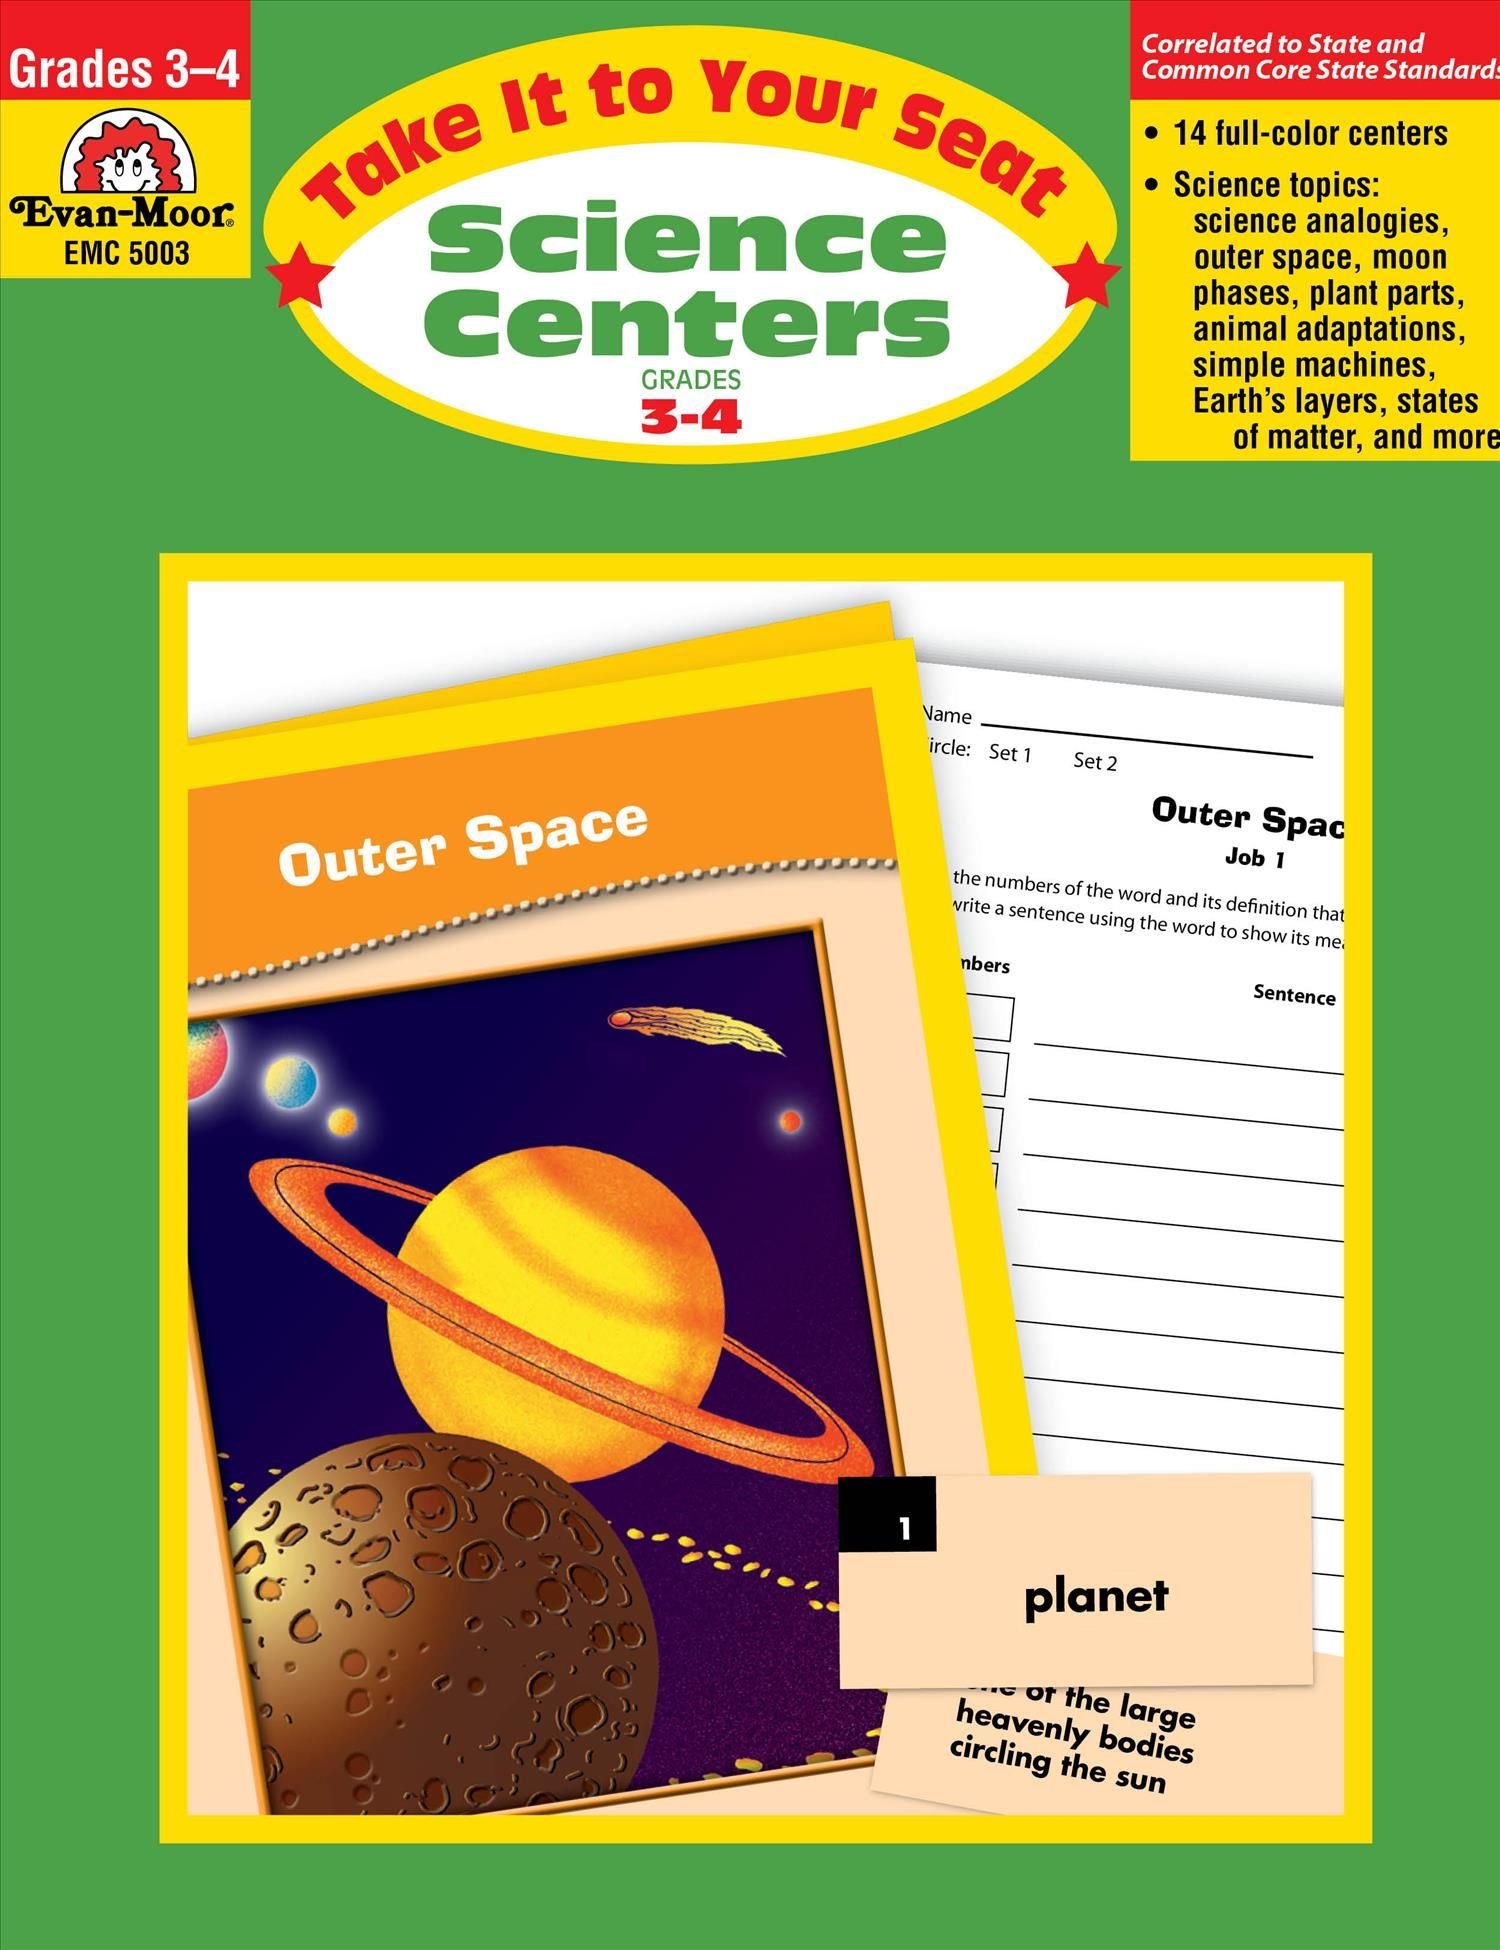 Free　Evan-Moor　Resource　Buy　It　Science　Your　Take　Teacher　by　to　With　Seat:　Centers,　Corporation　Grade　Delivery